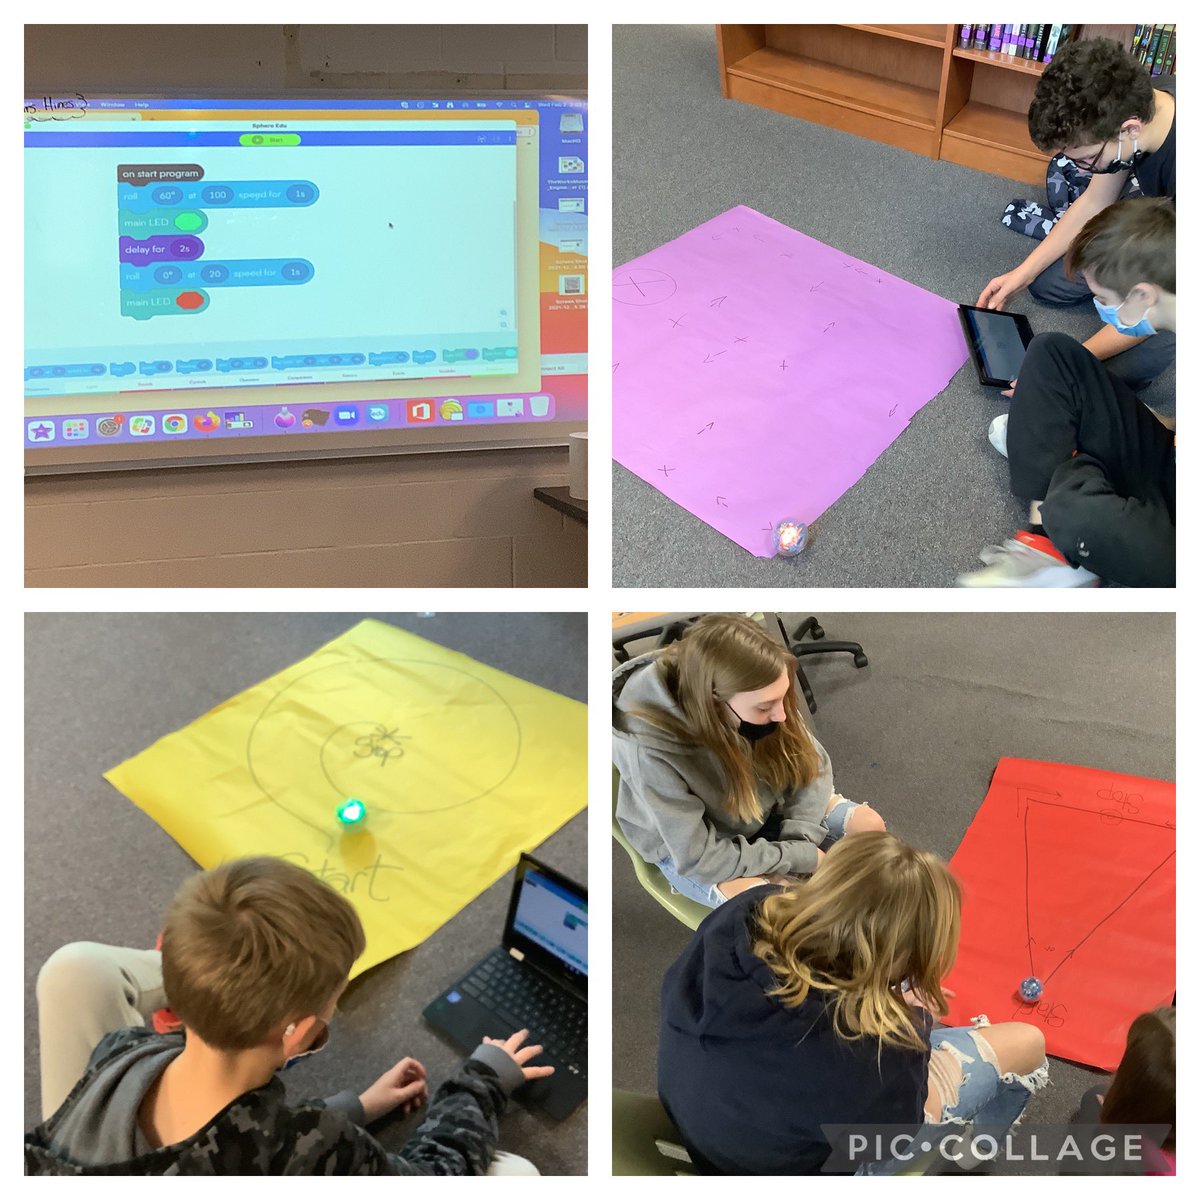 Taught with @MsLibrariAnn @HancockMSHS teaching coding to 7thGr @CTE_WCPS. Ss first steps in block coding @SpheroEdu and this was a GREAT first start 🎉🎉Next steps are coding the scale obstacle course they created in math. @WCPS_LMS @AnnKAnders @LScumpieru @coachpongratz #code